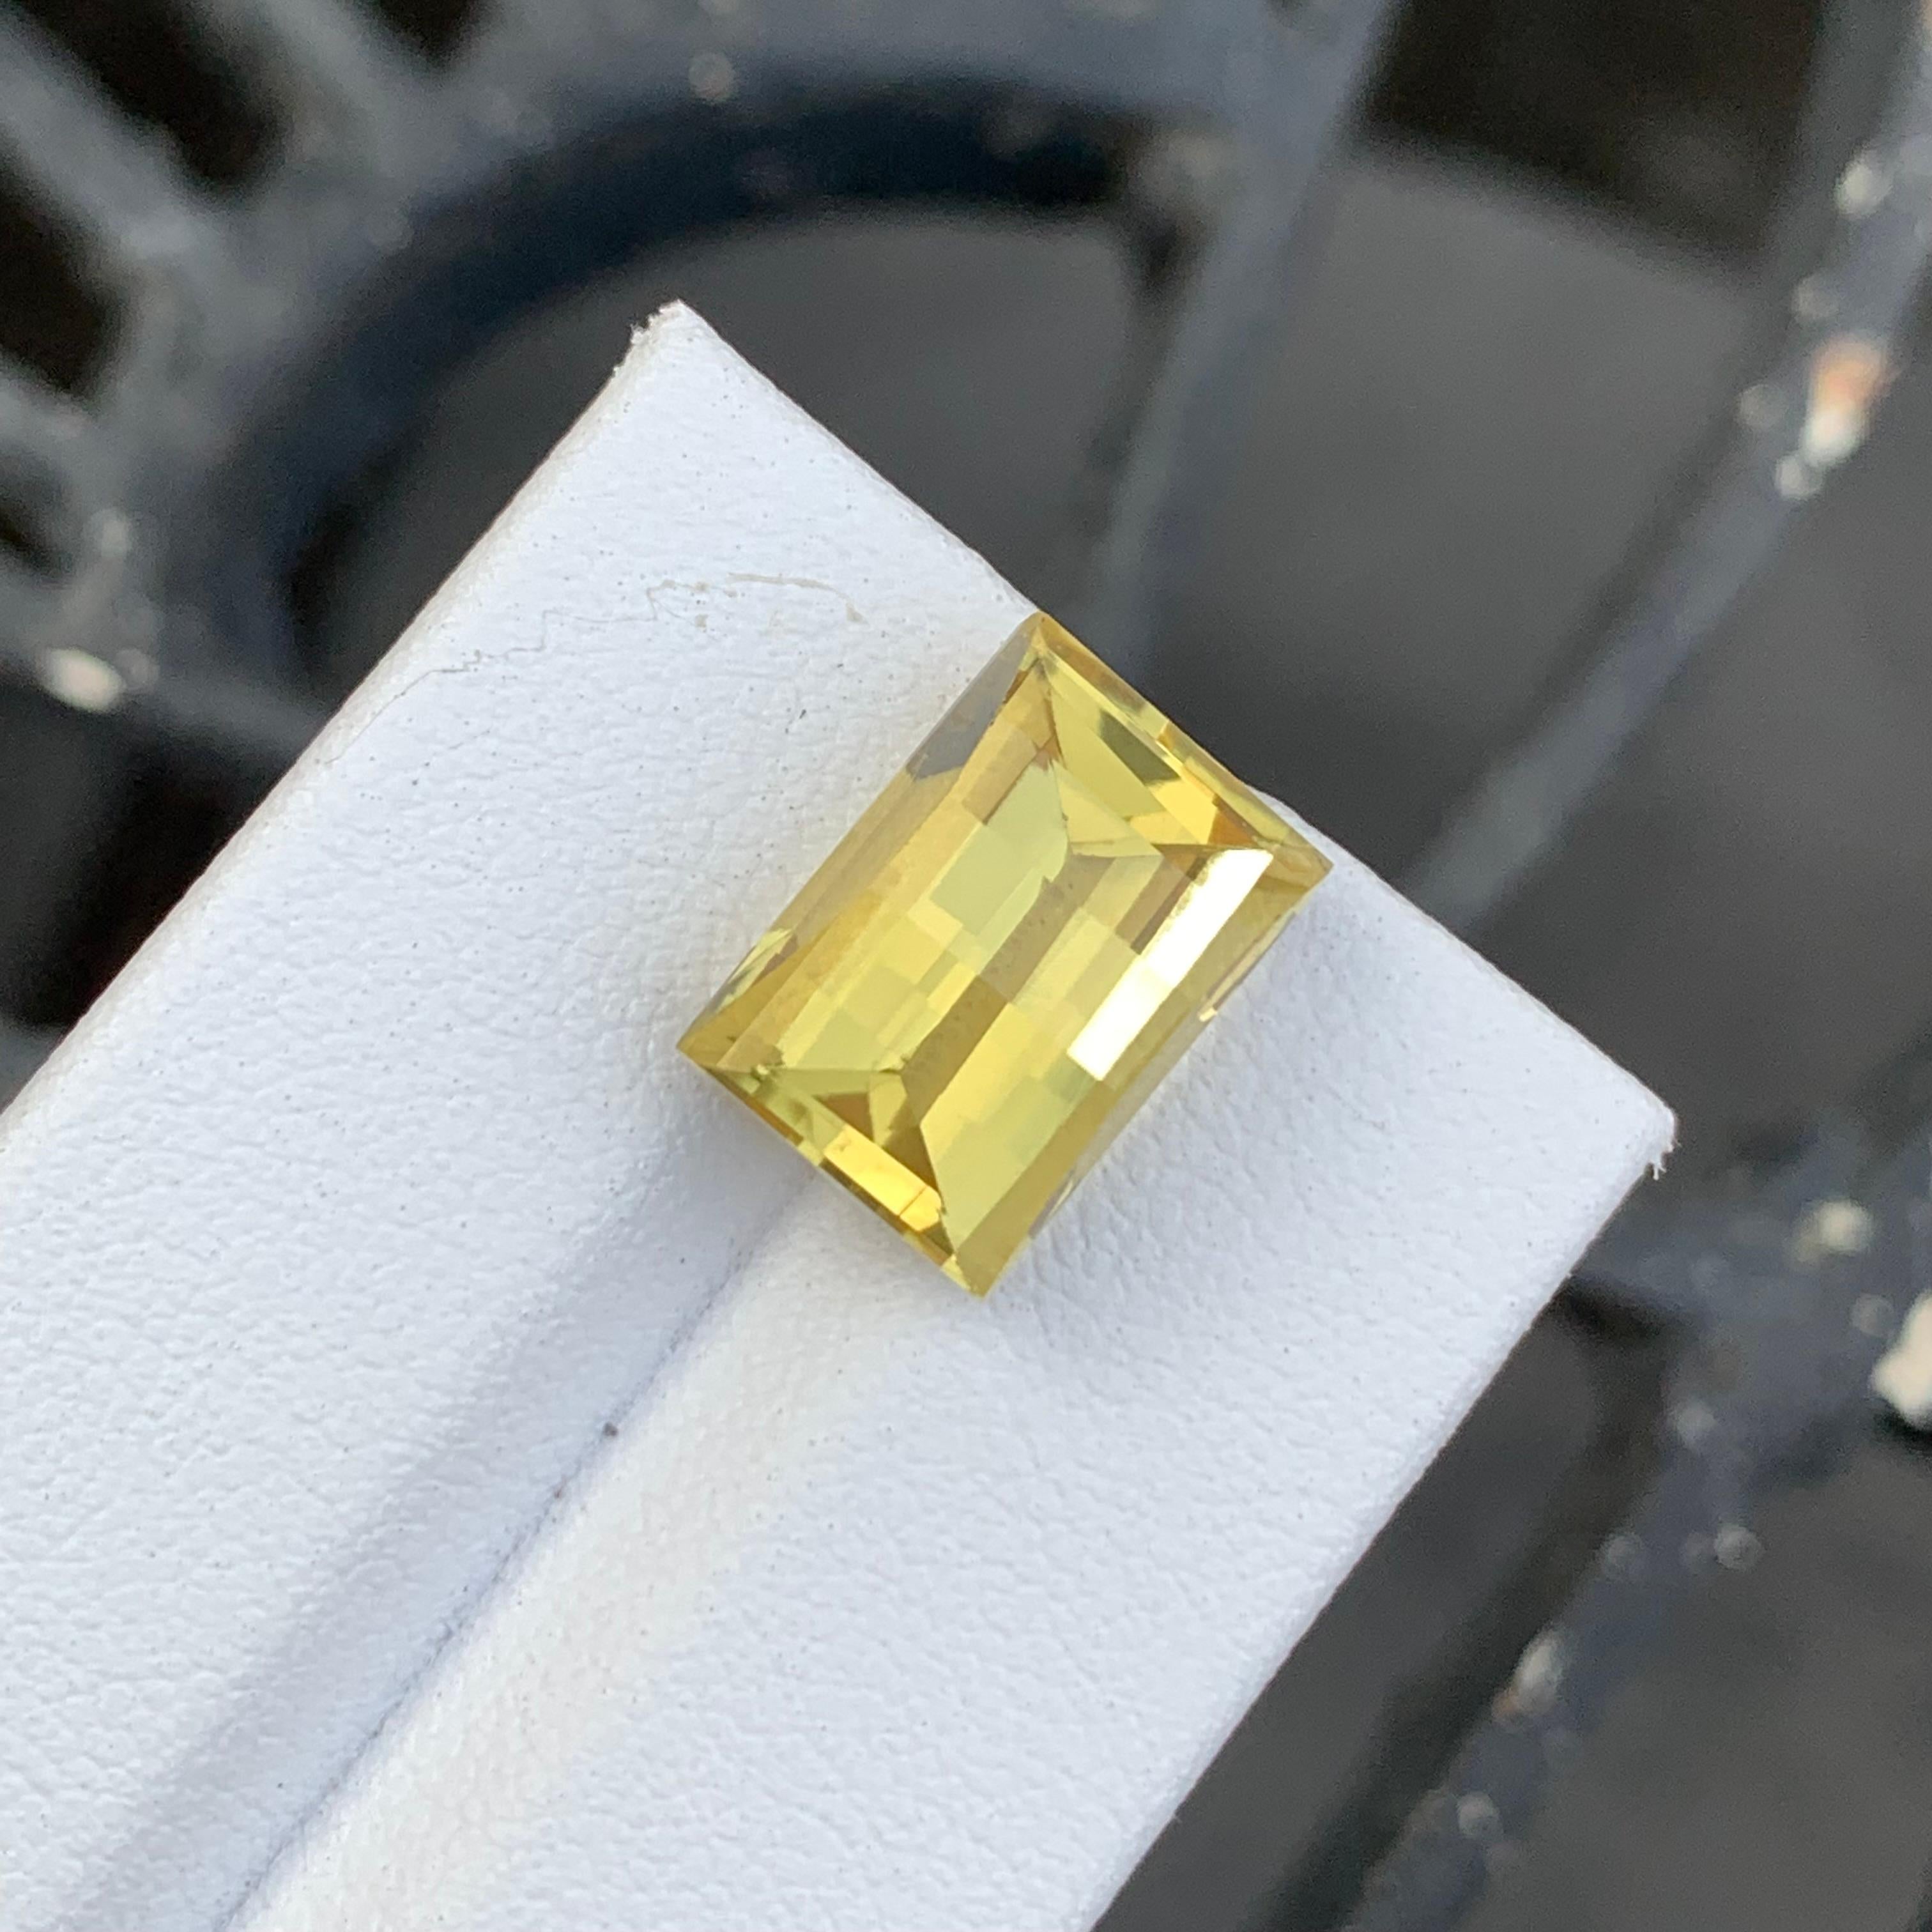 Gemstone Type : Lemon Quartz
Weight : 8.0 Carats
Dimensions : 13.9x9.8x8.5 Mm
Origin : Brazil
Clarity : Eye Clean
Cut: Pixel Cut / Bar cut
Color: Yellow
Certificate: On Demand
This sensitive tone not only works well in female jewellery but also